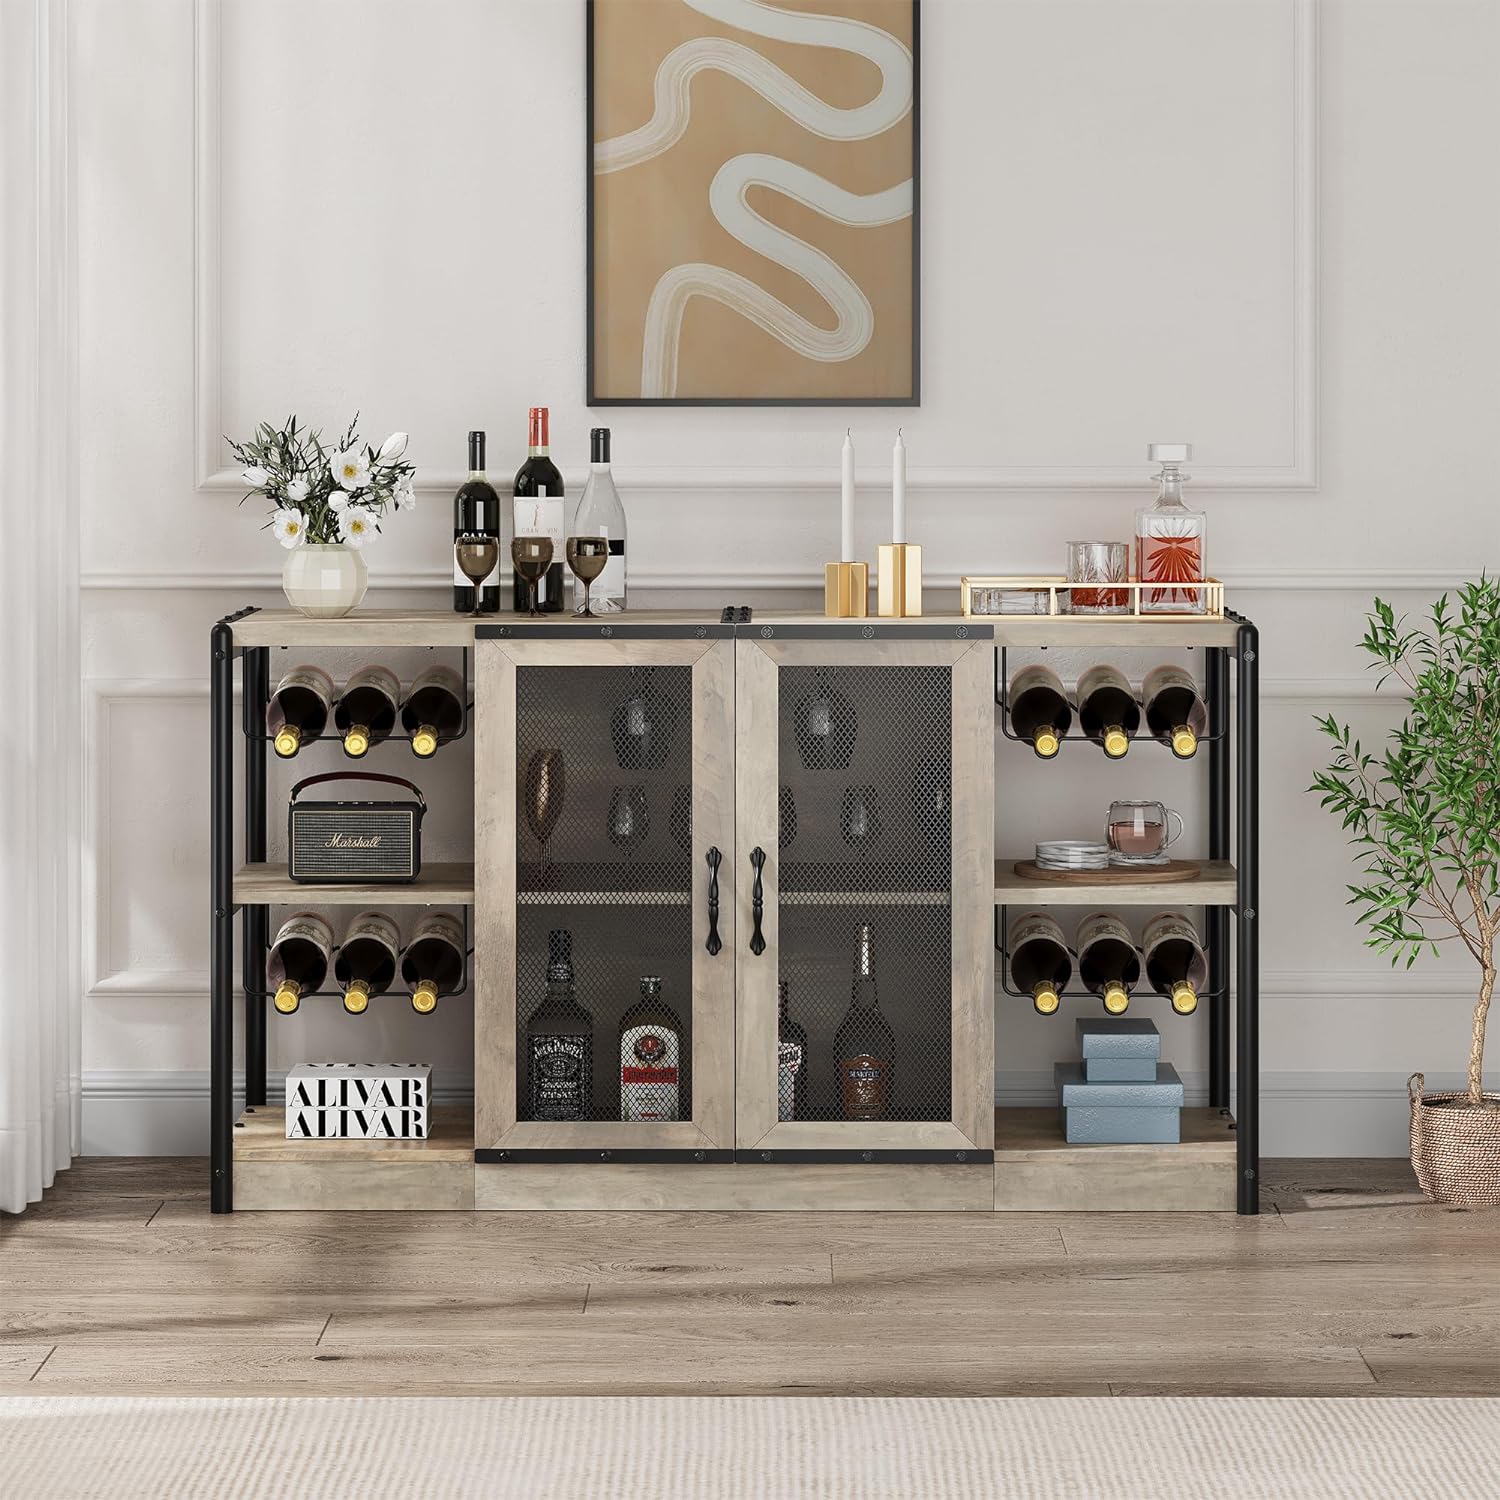 Wine Bar Cabinet, Wine Bar Cabinet with Wine Racks and Glass Holders, Industrial Coffee Bar Cabinet for Liquor and Glasses, Home Bar Furniture for Dining Room, Living Room Gray